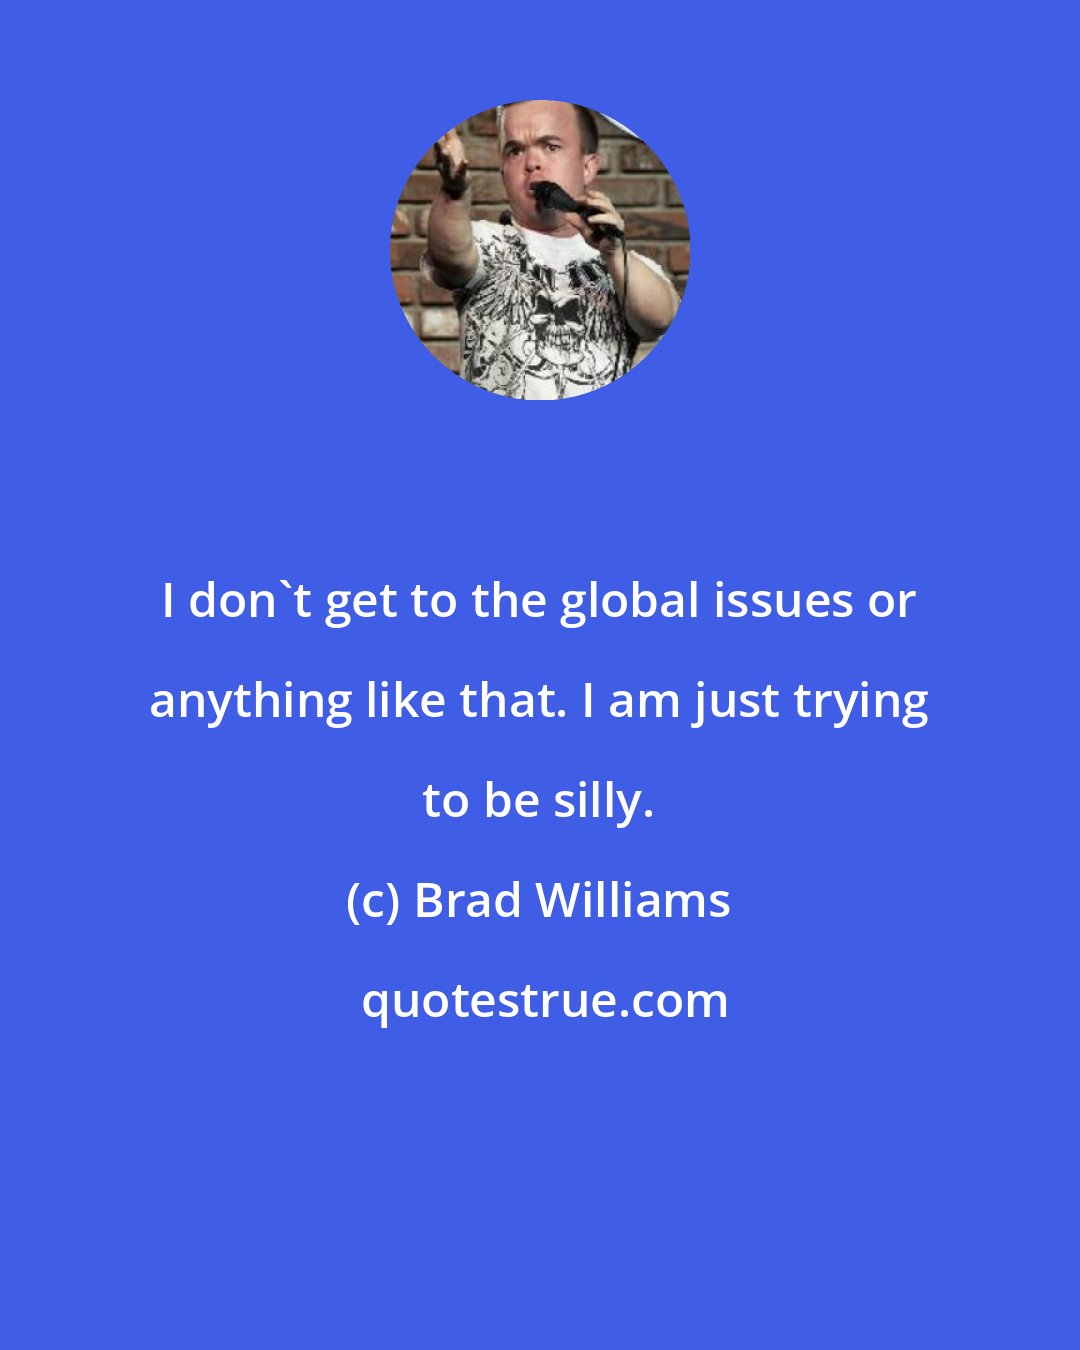 Brad Williams: I don't get to the global issues or anything like that. I am just trying to be silly.